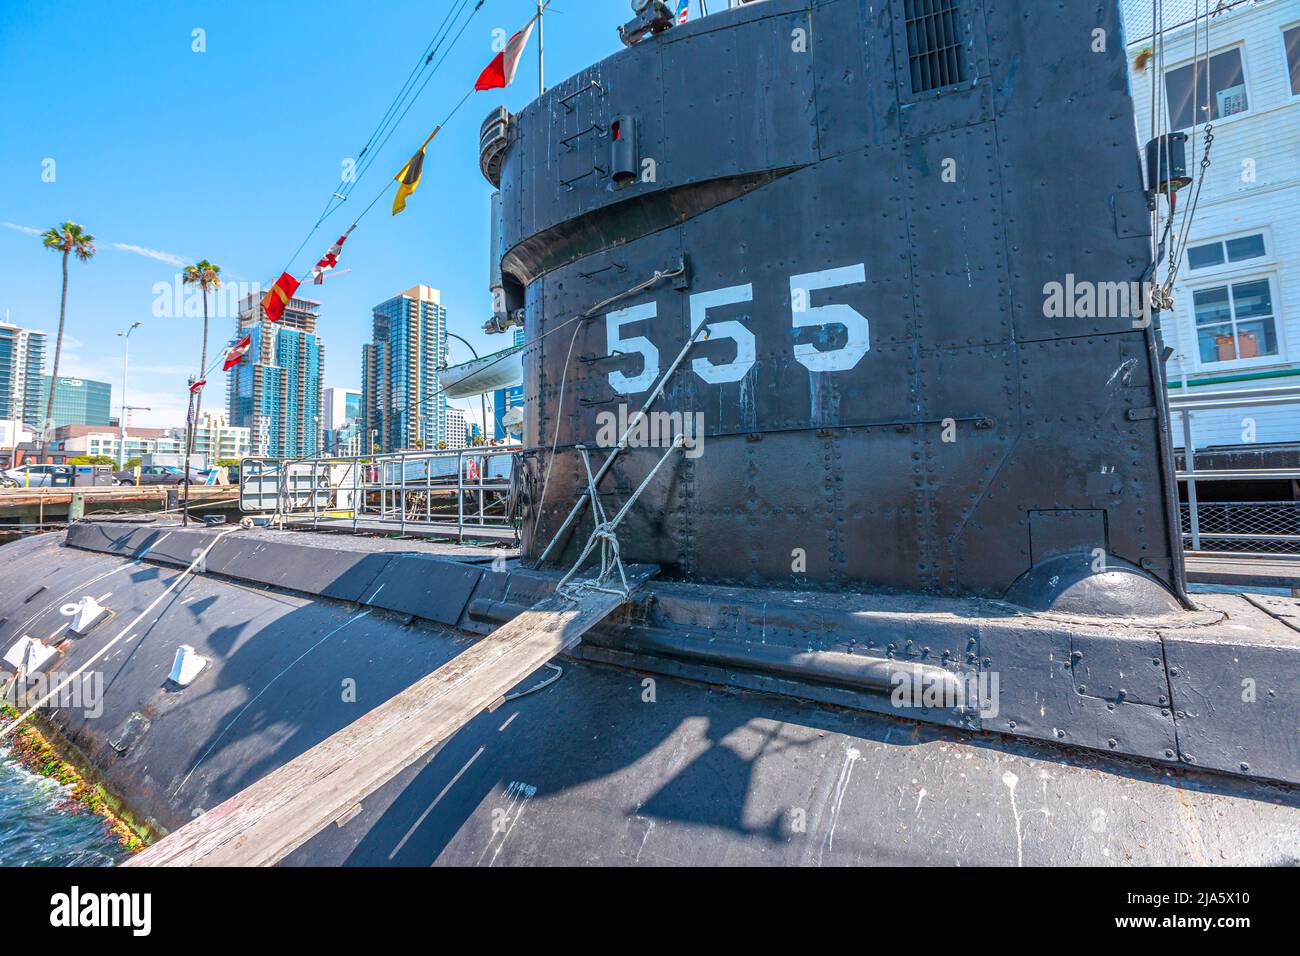 San Diego, Navy Pier, California, USA - 1. August 2018: USS Dolphin AGSS-555 American Submarine of United States Navy im Maritime Museum of San Diego Stockfoto